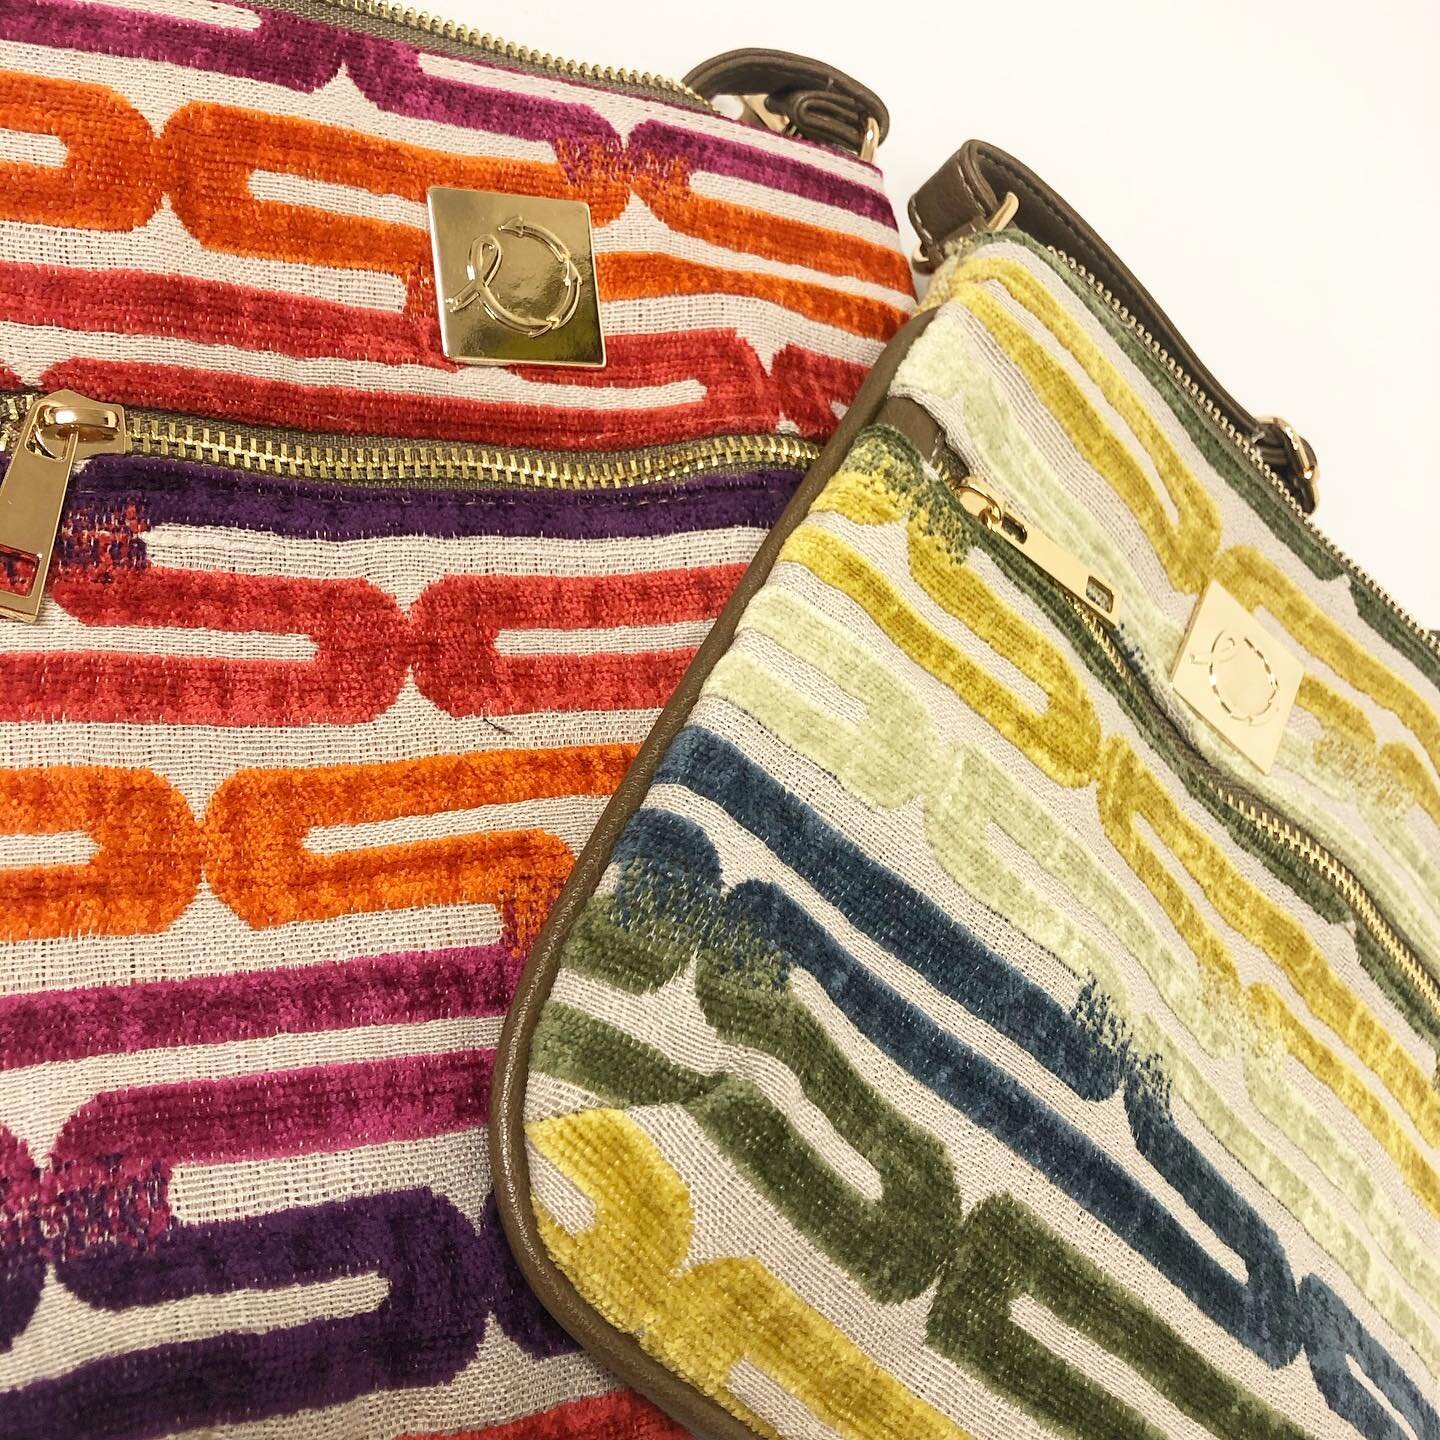 Hope everyone had a great weekend! ☀️ Spring is right around the corner and we are ready for all the bright colors and good weather! 🌸🌱🌼 Keep an eye out for new fun colors in our Addy crossbody bag!  #springiscoming #springcolors #upcycledforhope 